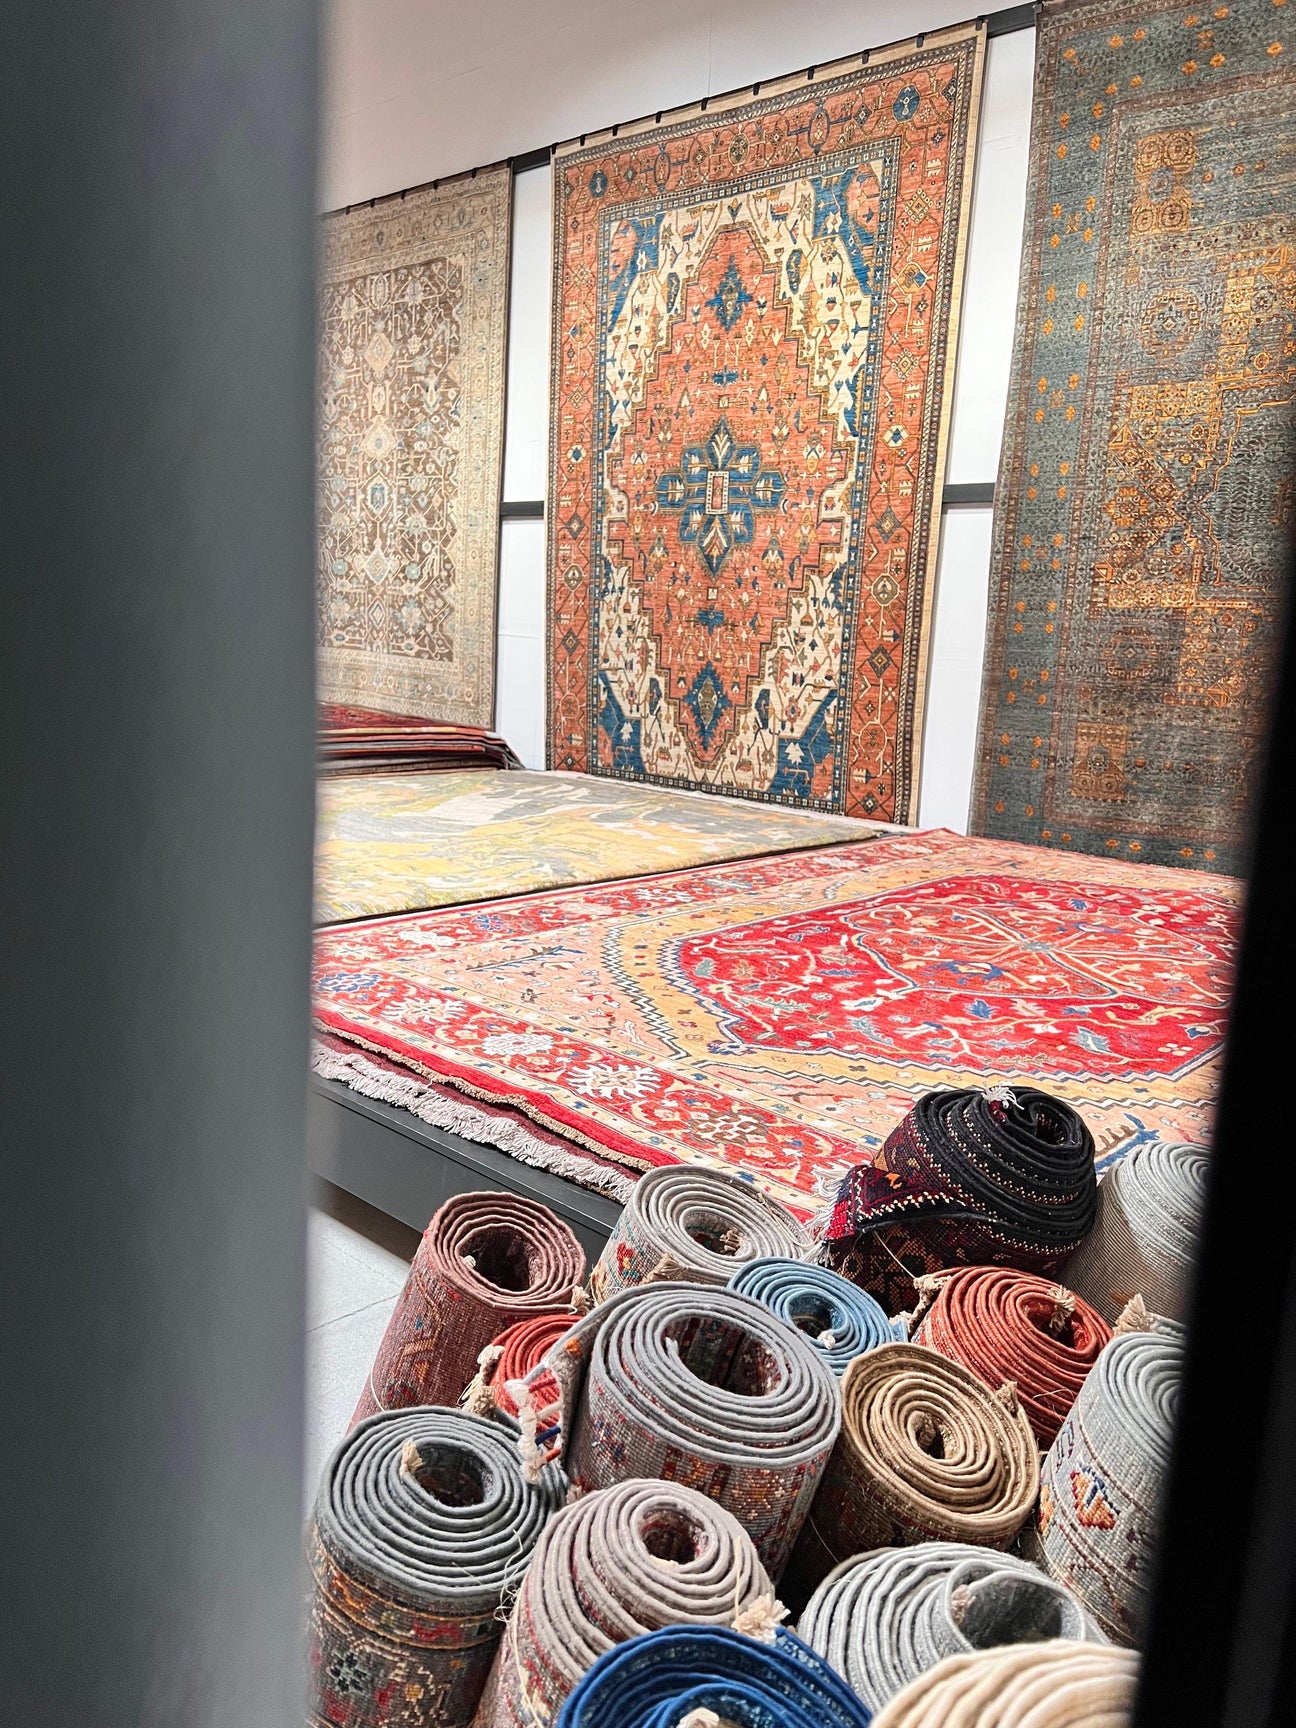 San Diego Rug Store: The Rug Mine — Handmade & Hand-Knotted Rugs - The Rug Mine - Authentic Oriental Rugs